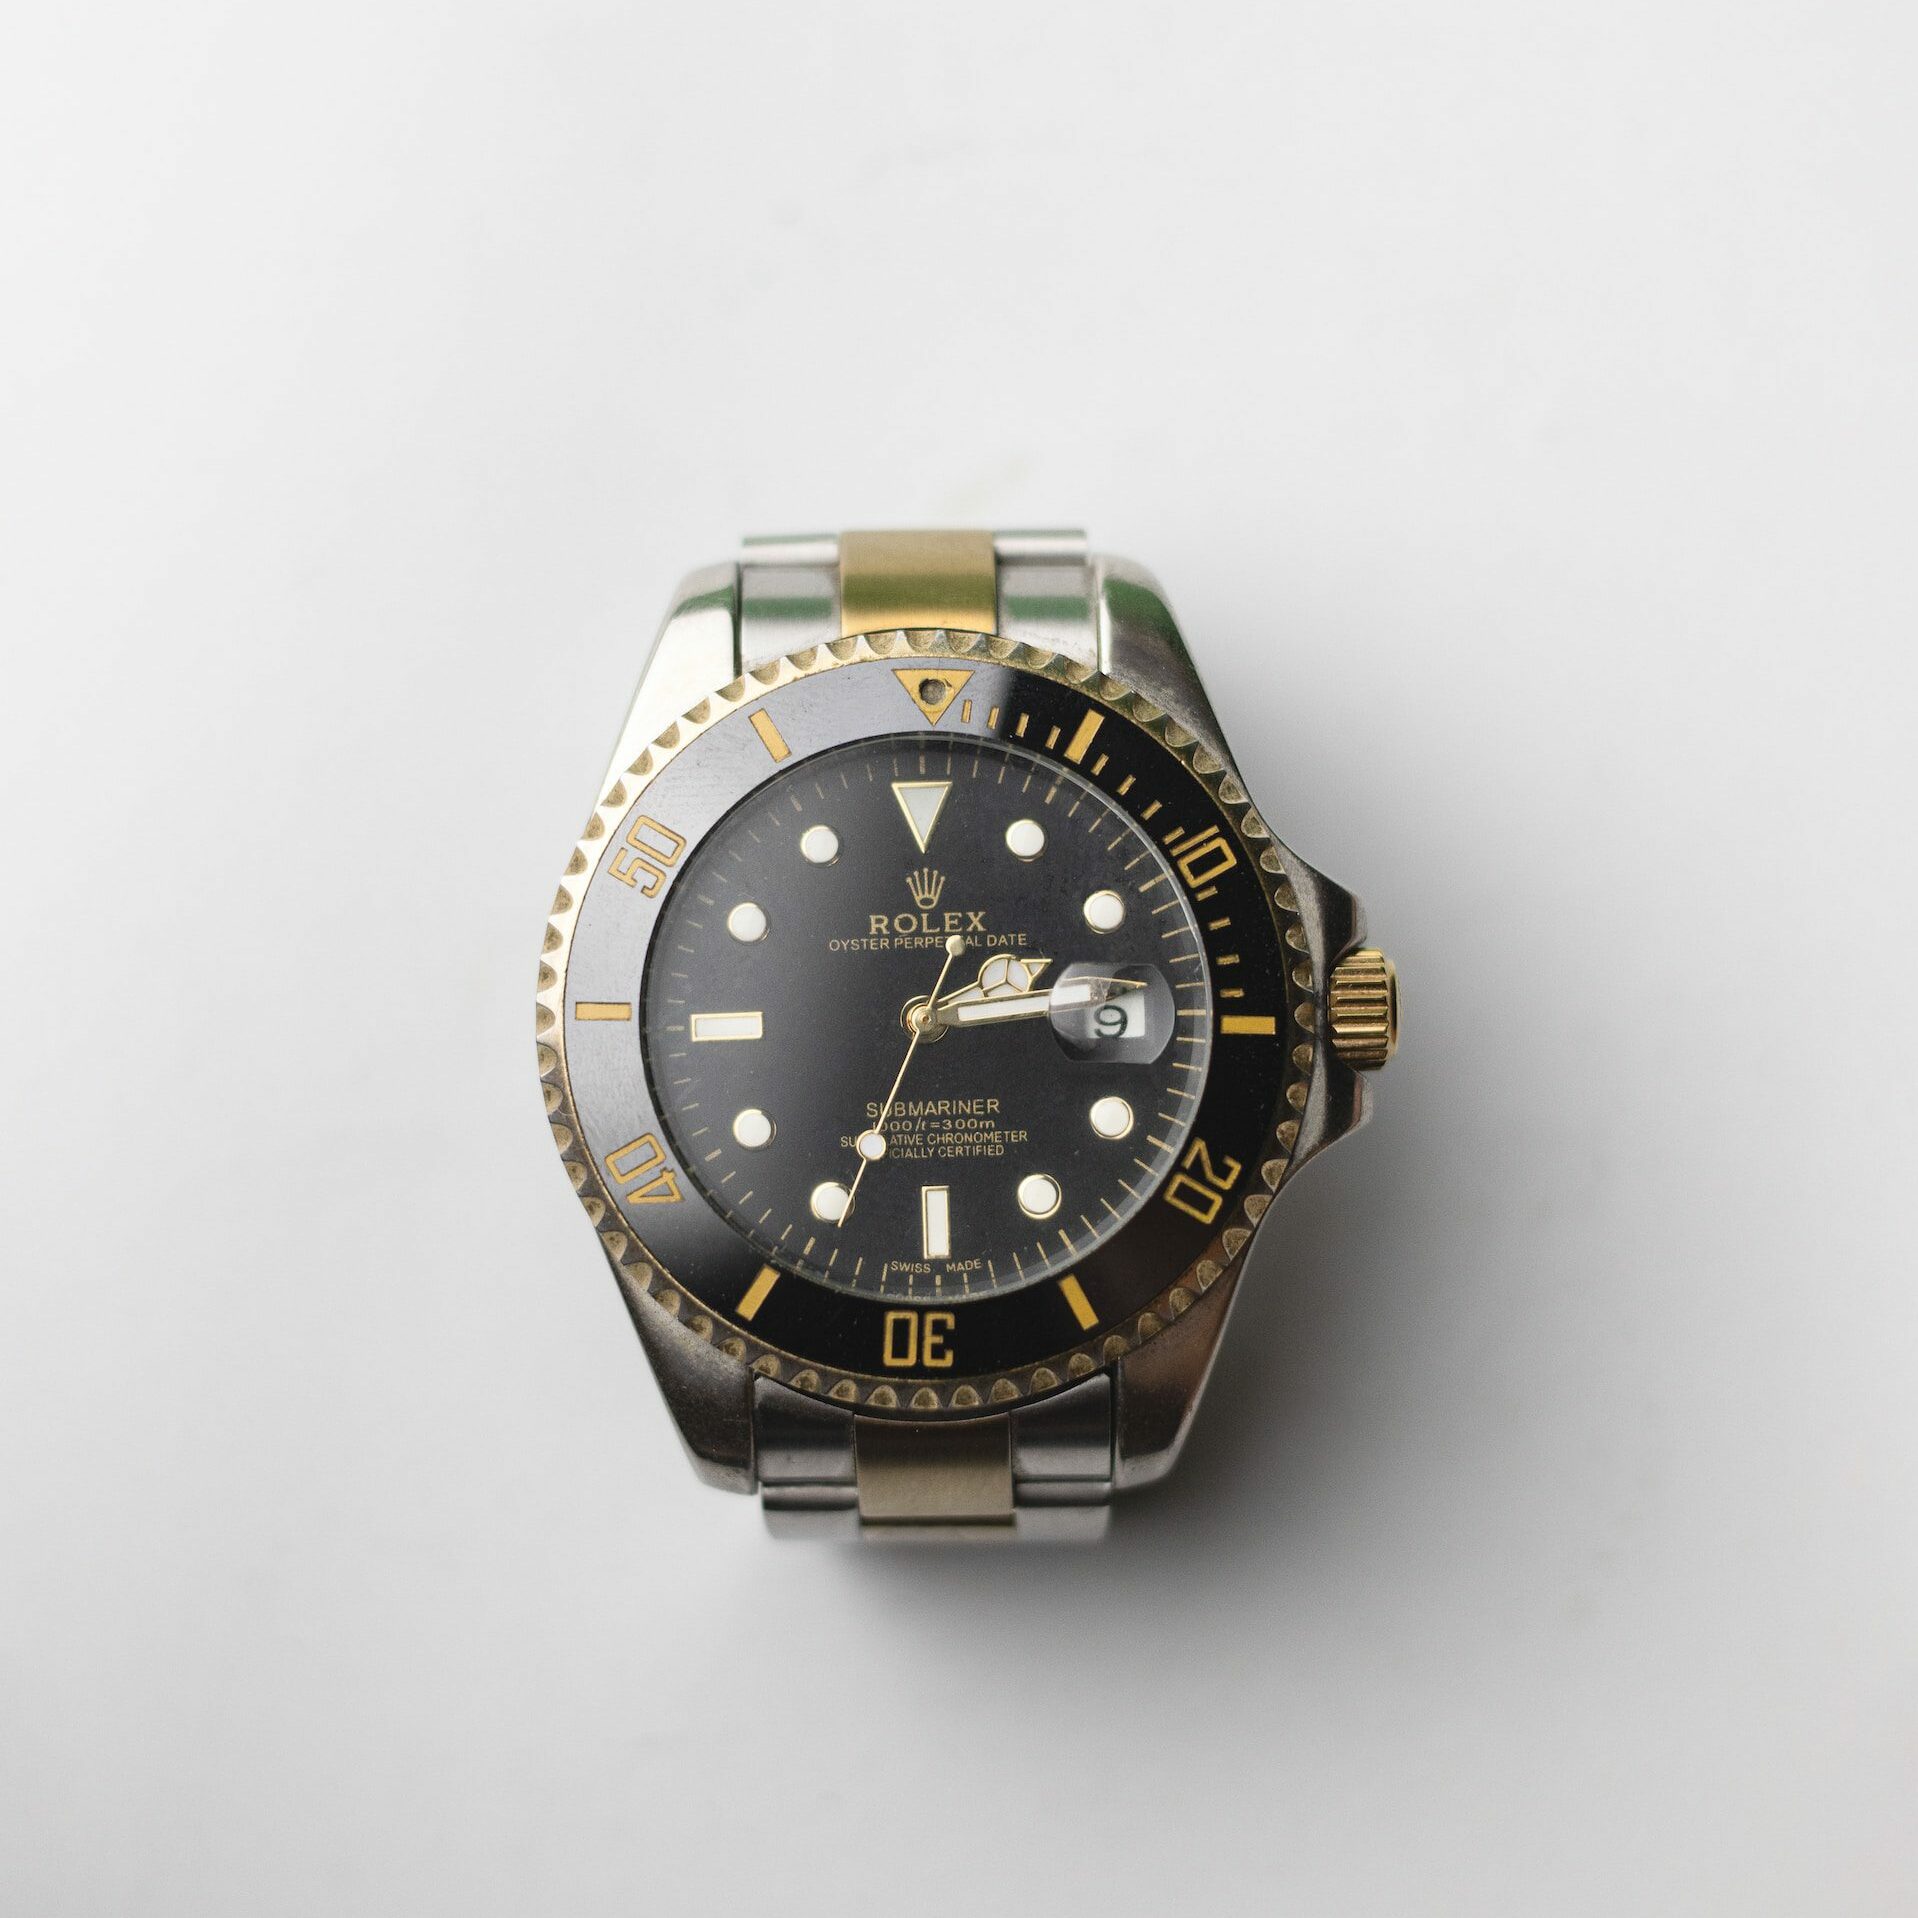 Discovering the History and Evolution of the Rolex Submariner